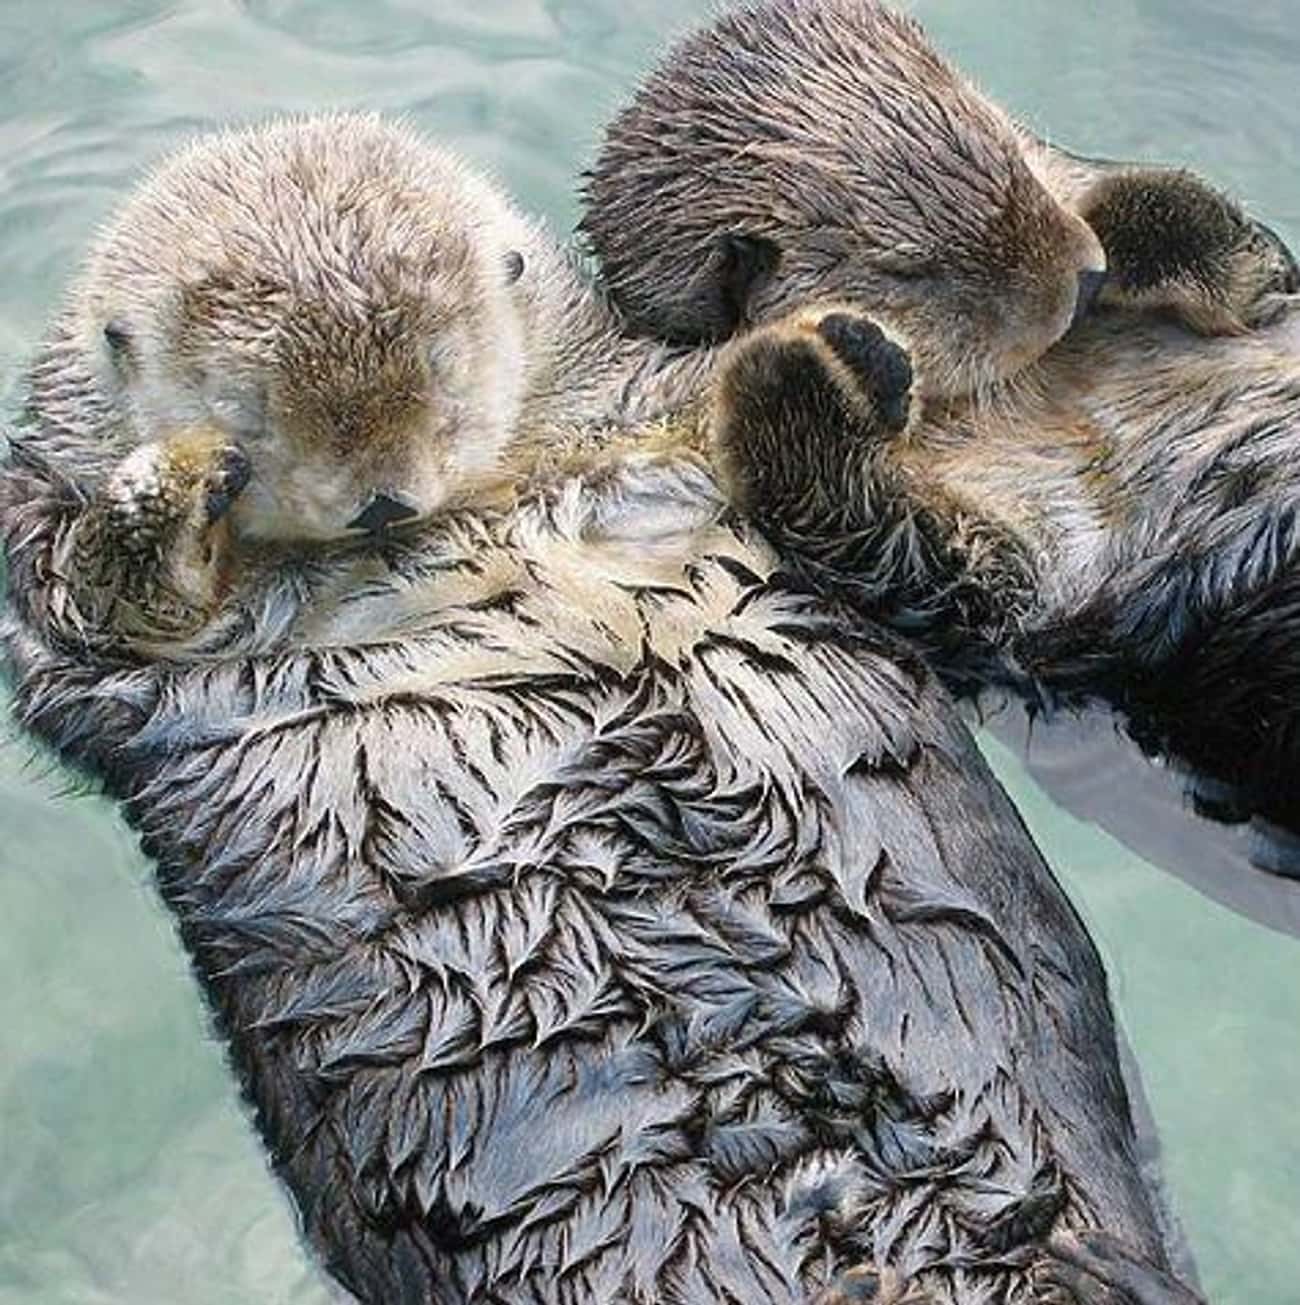 Otters hold hands